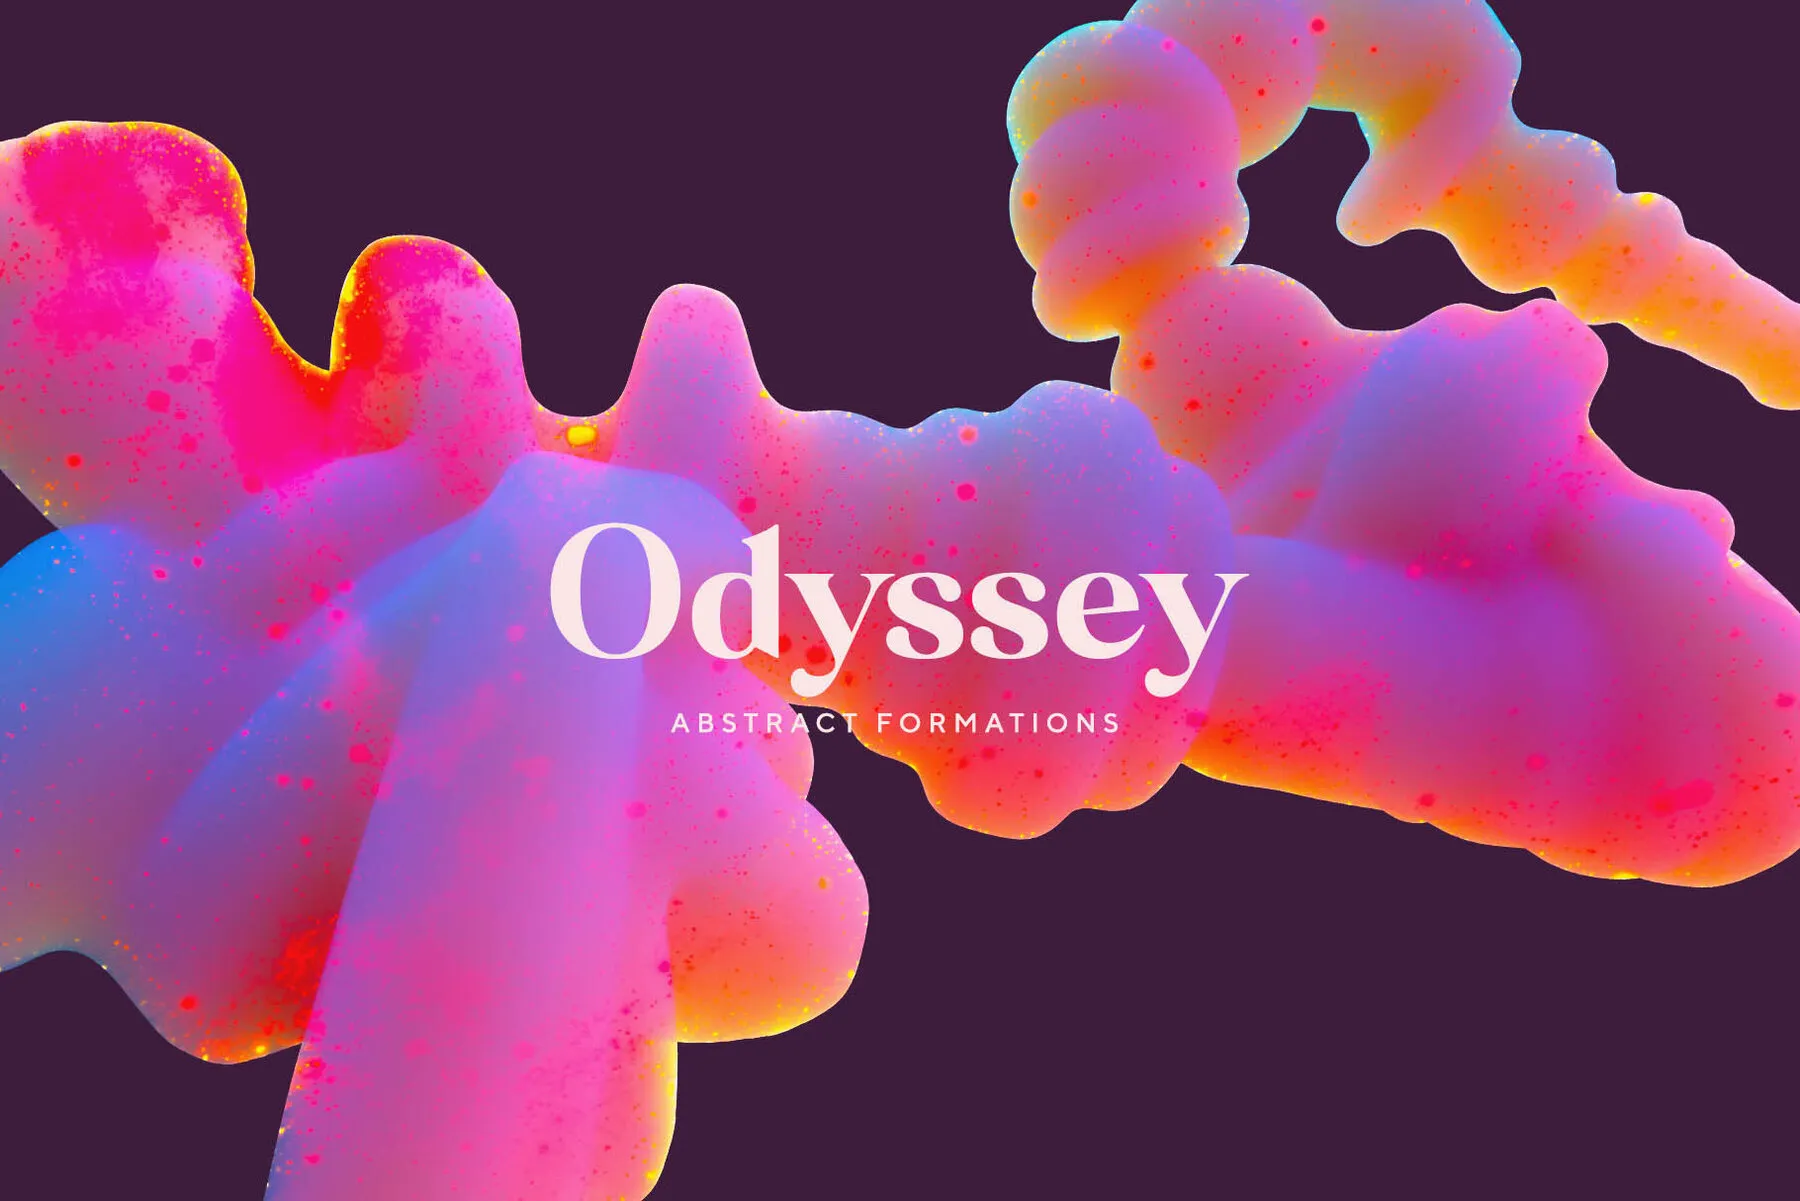 Odyssey - Abstract Formations